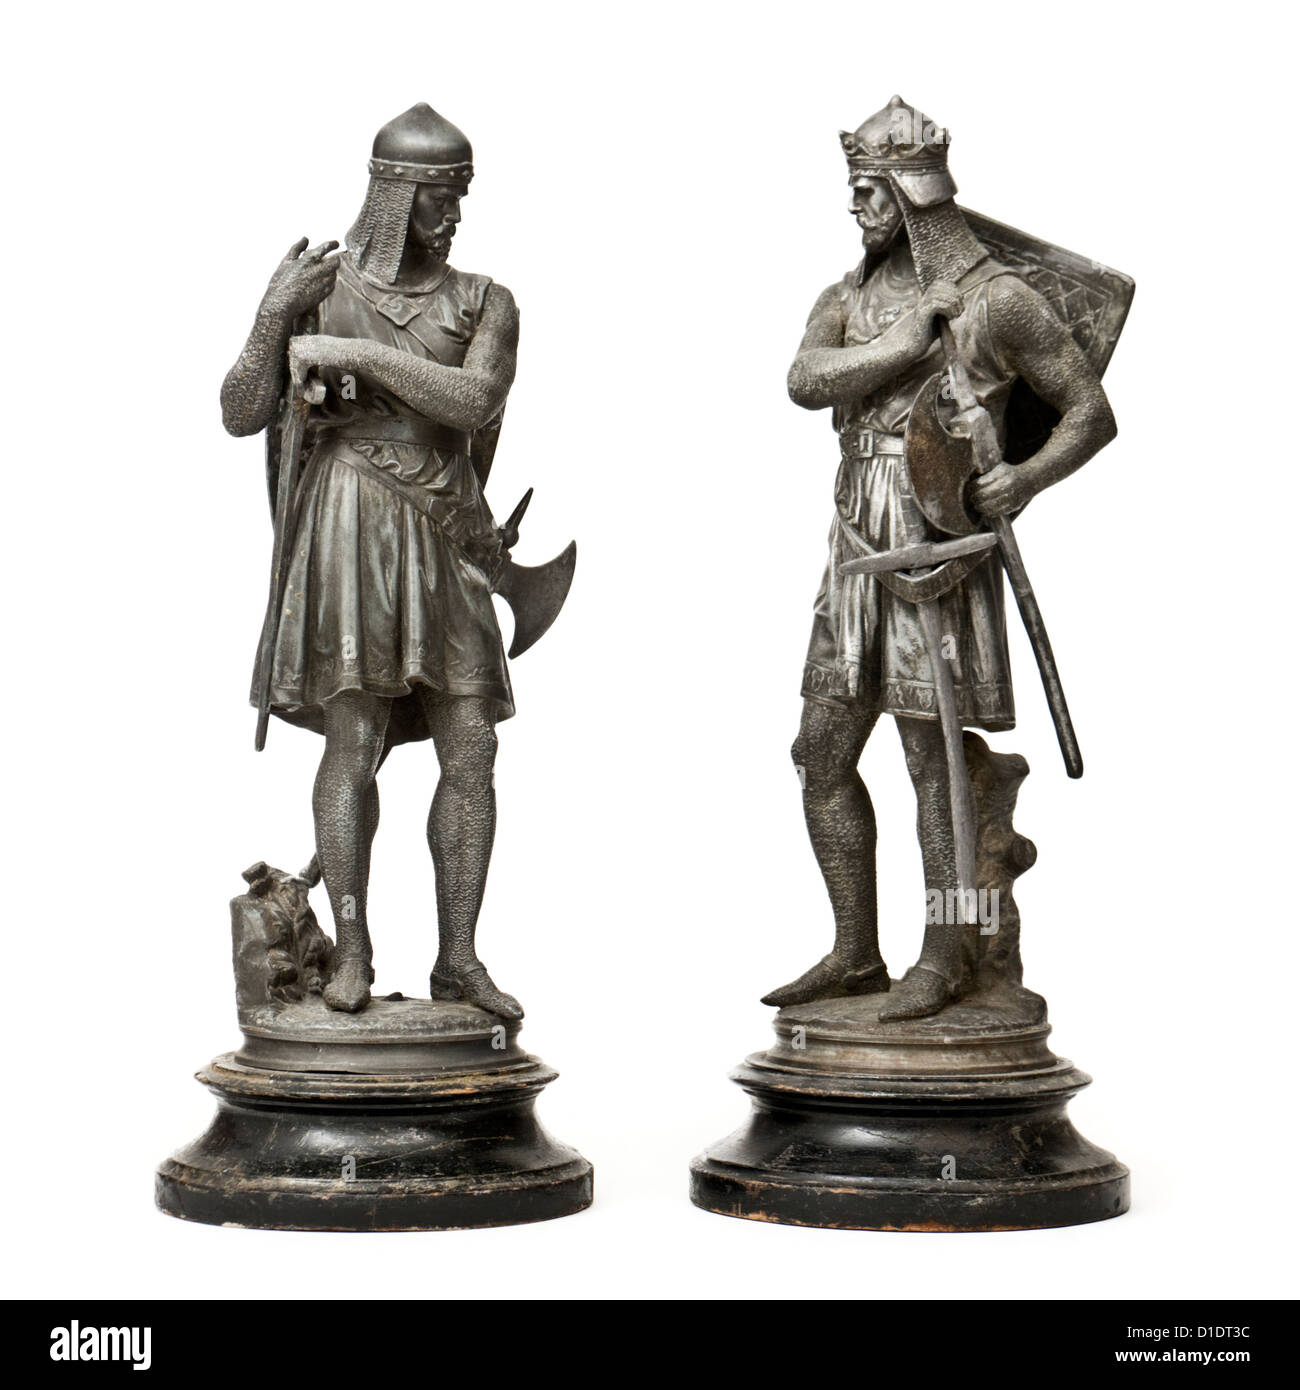 Bronze or Spelter? How to tell the difference with David Harper